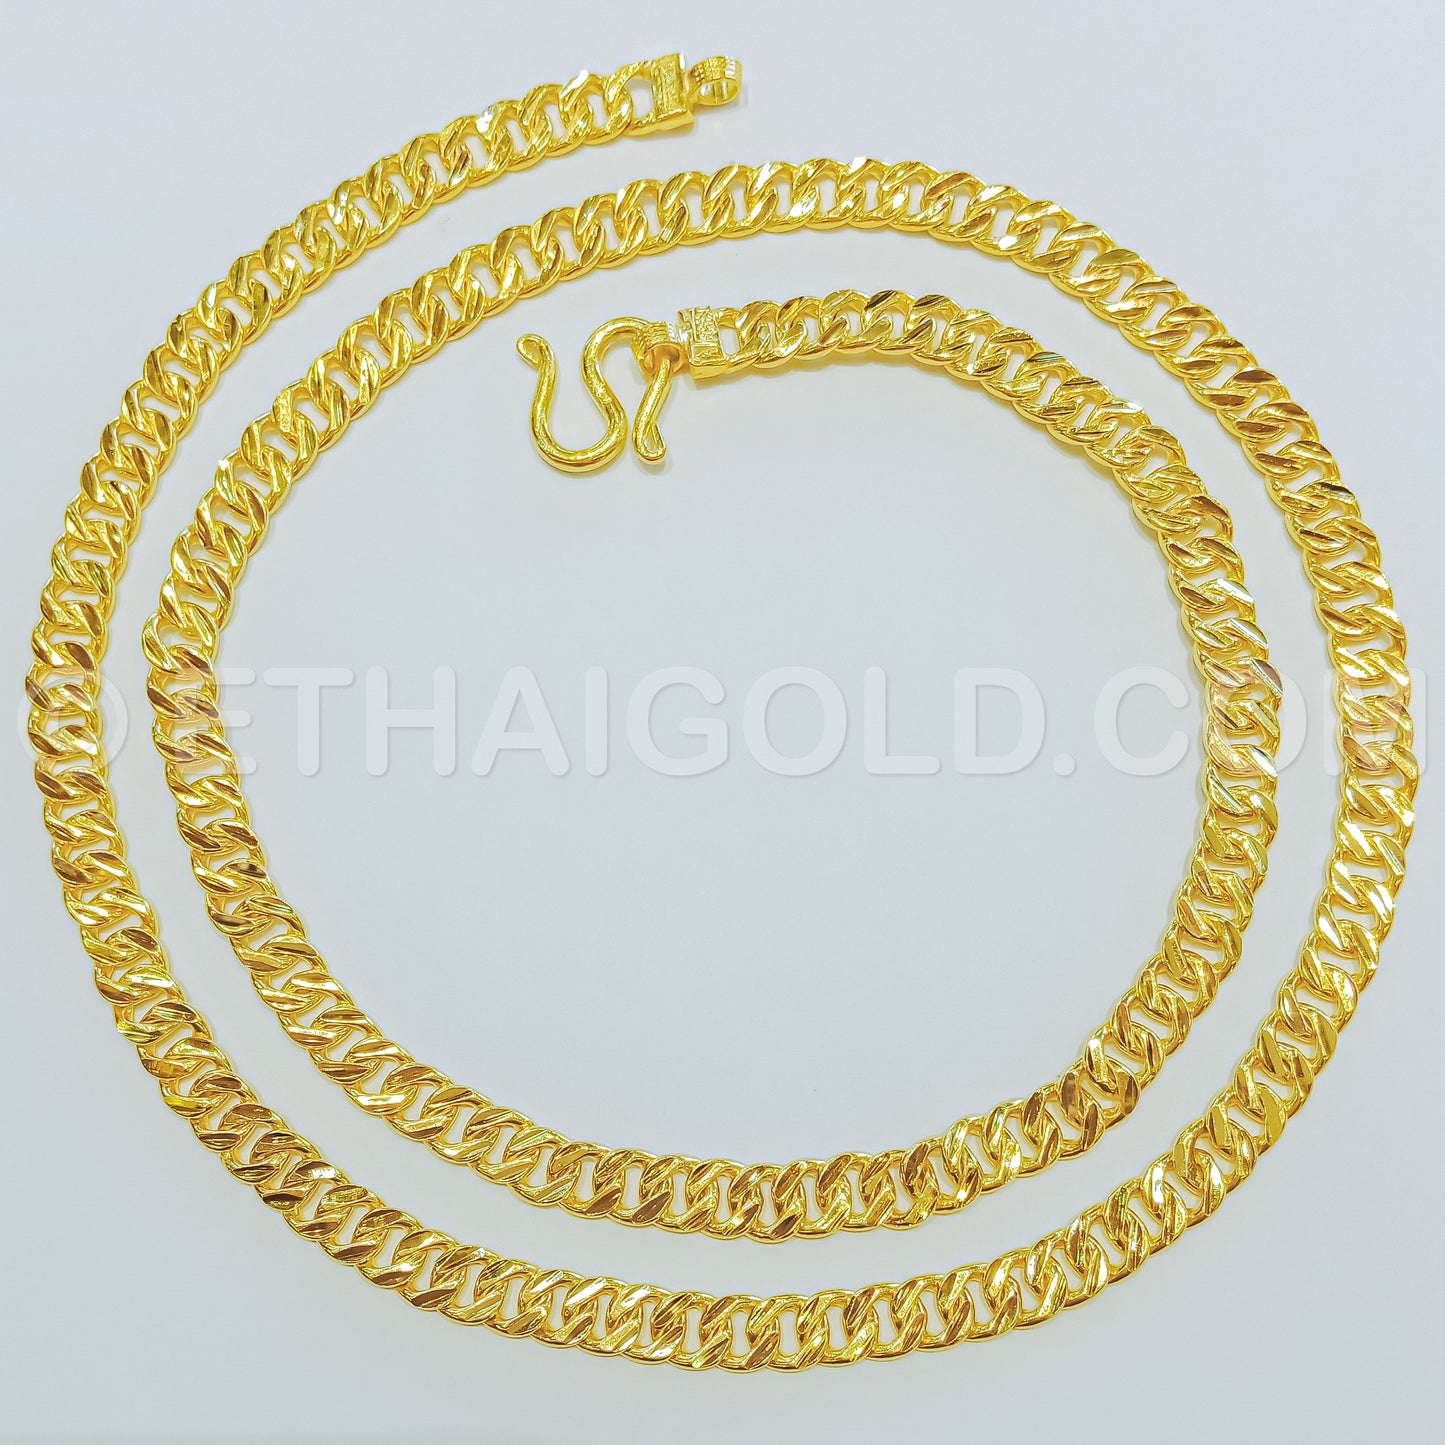 2 BAHT POLISHED DIAMOND-CUT SOLID CURB CHAIN NECKLACE IN 23K GOLD (ID: N0702B)